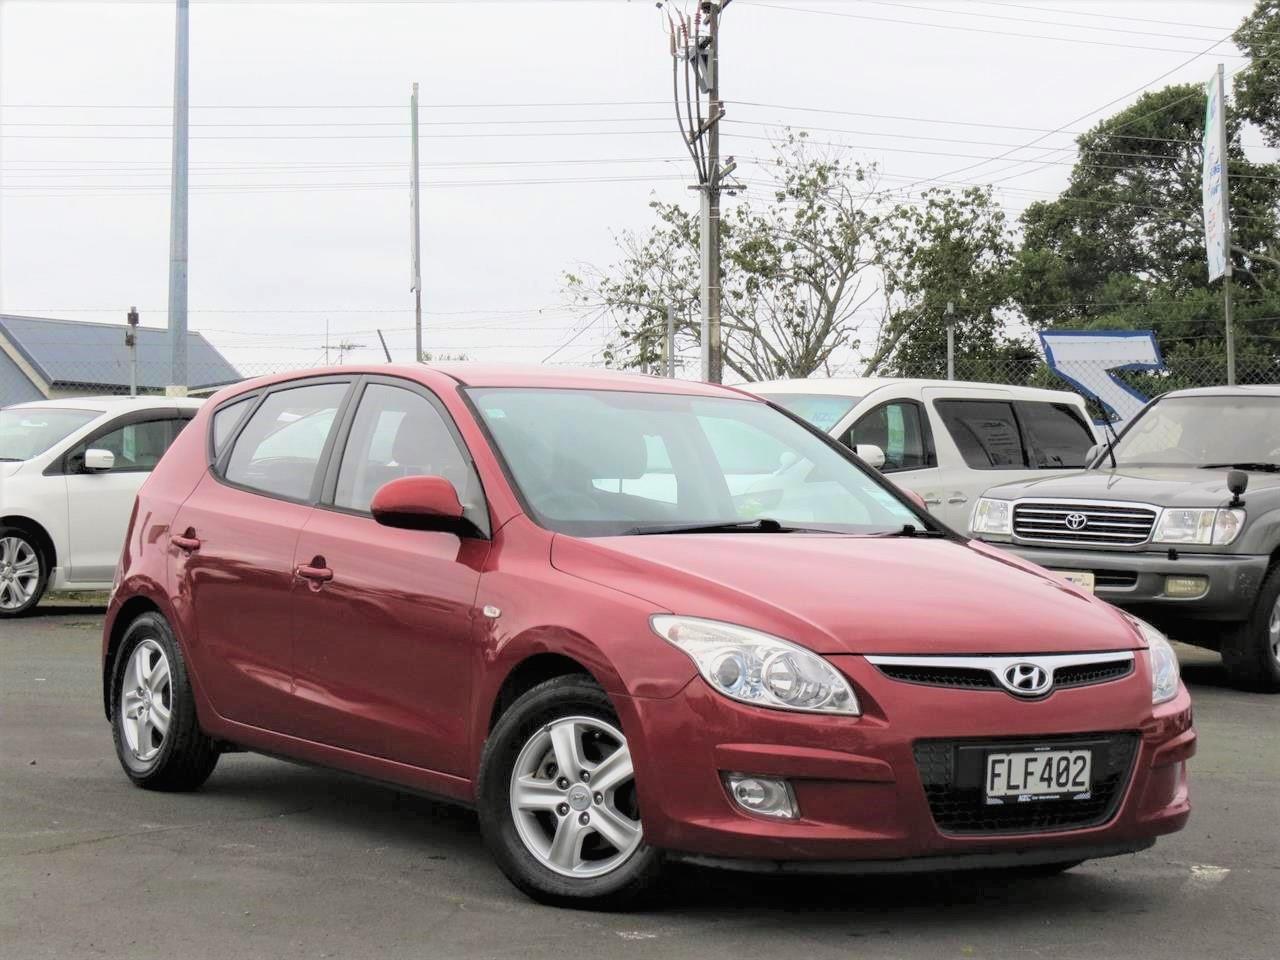 NZC 2010 Hyundai i30 just arrived to Auckland